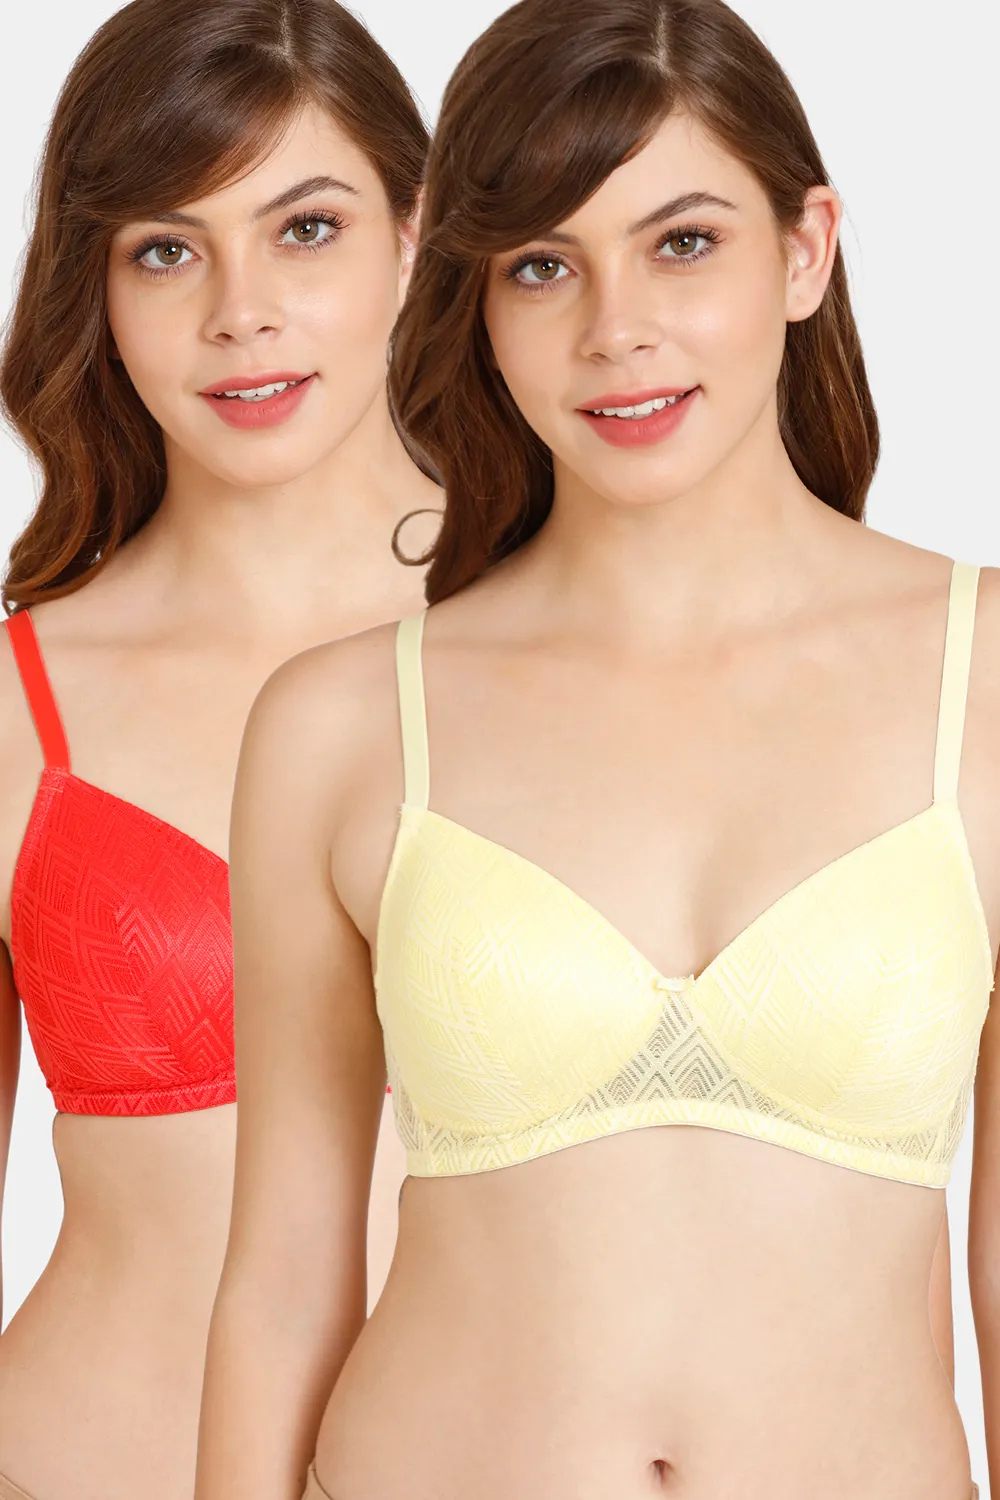 shyaway Women Full Coverage Non Padded Bra - Buy shyaway Women Full  Coverage Non Padded Bra Online at Best Prices in India